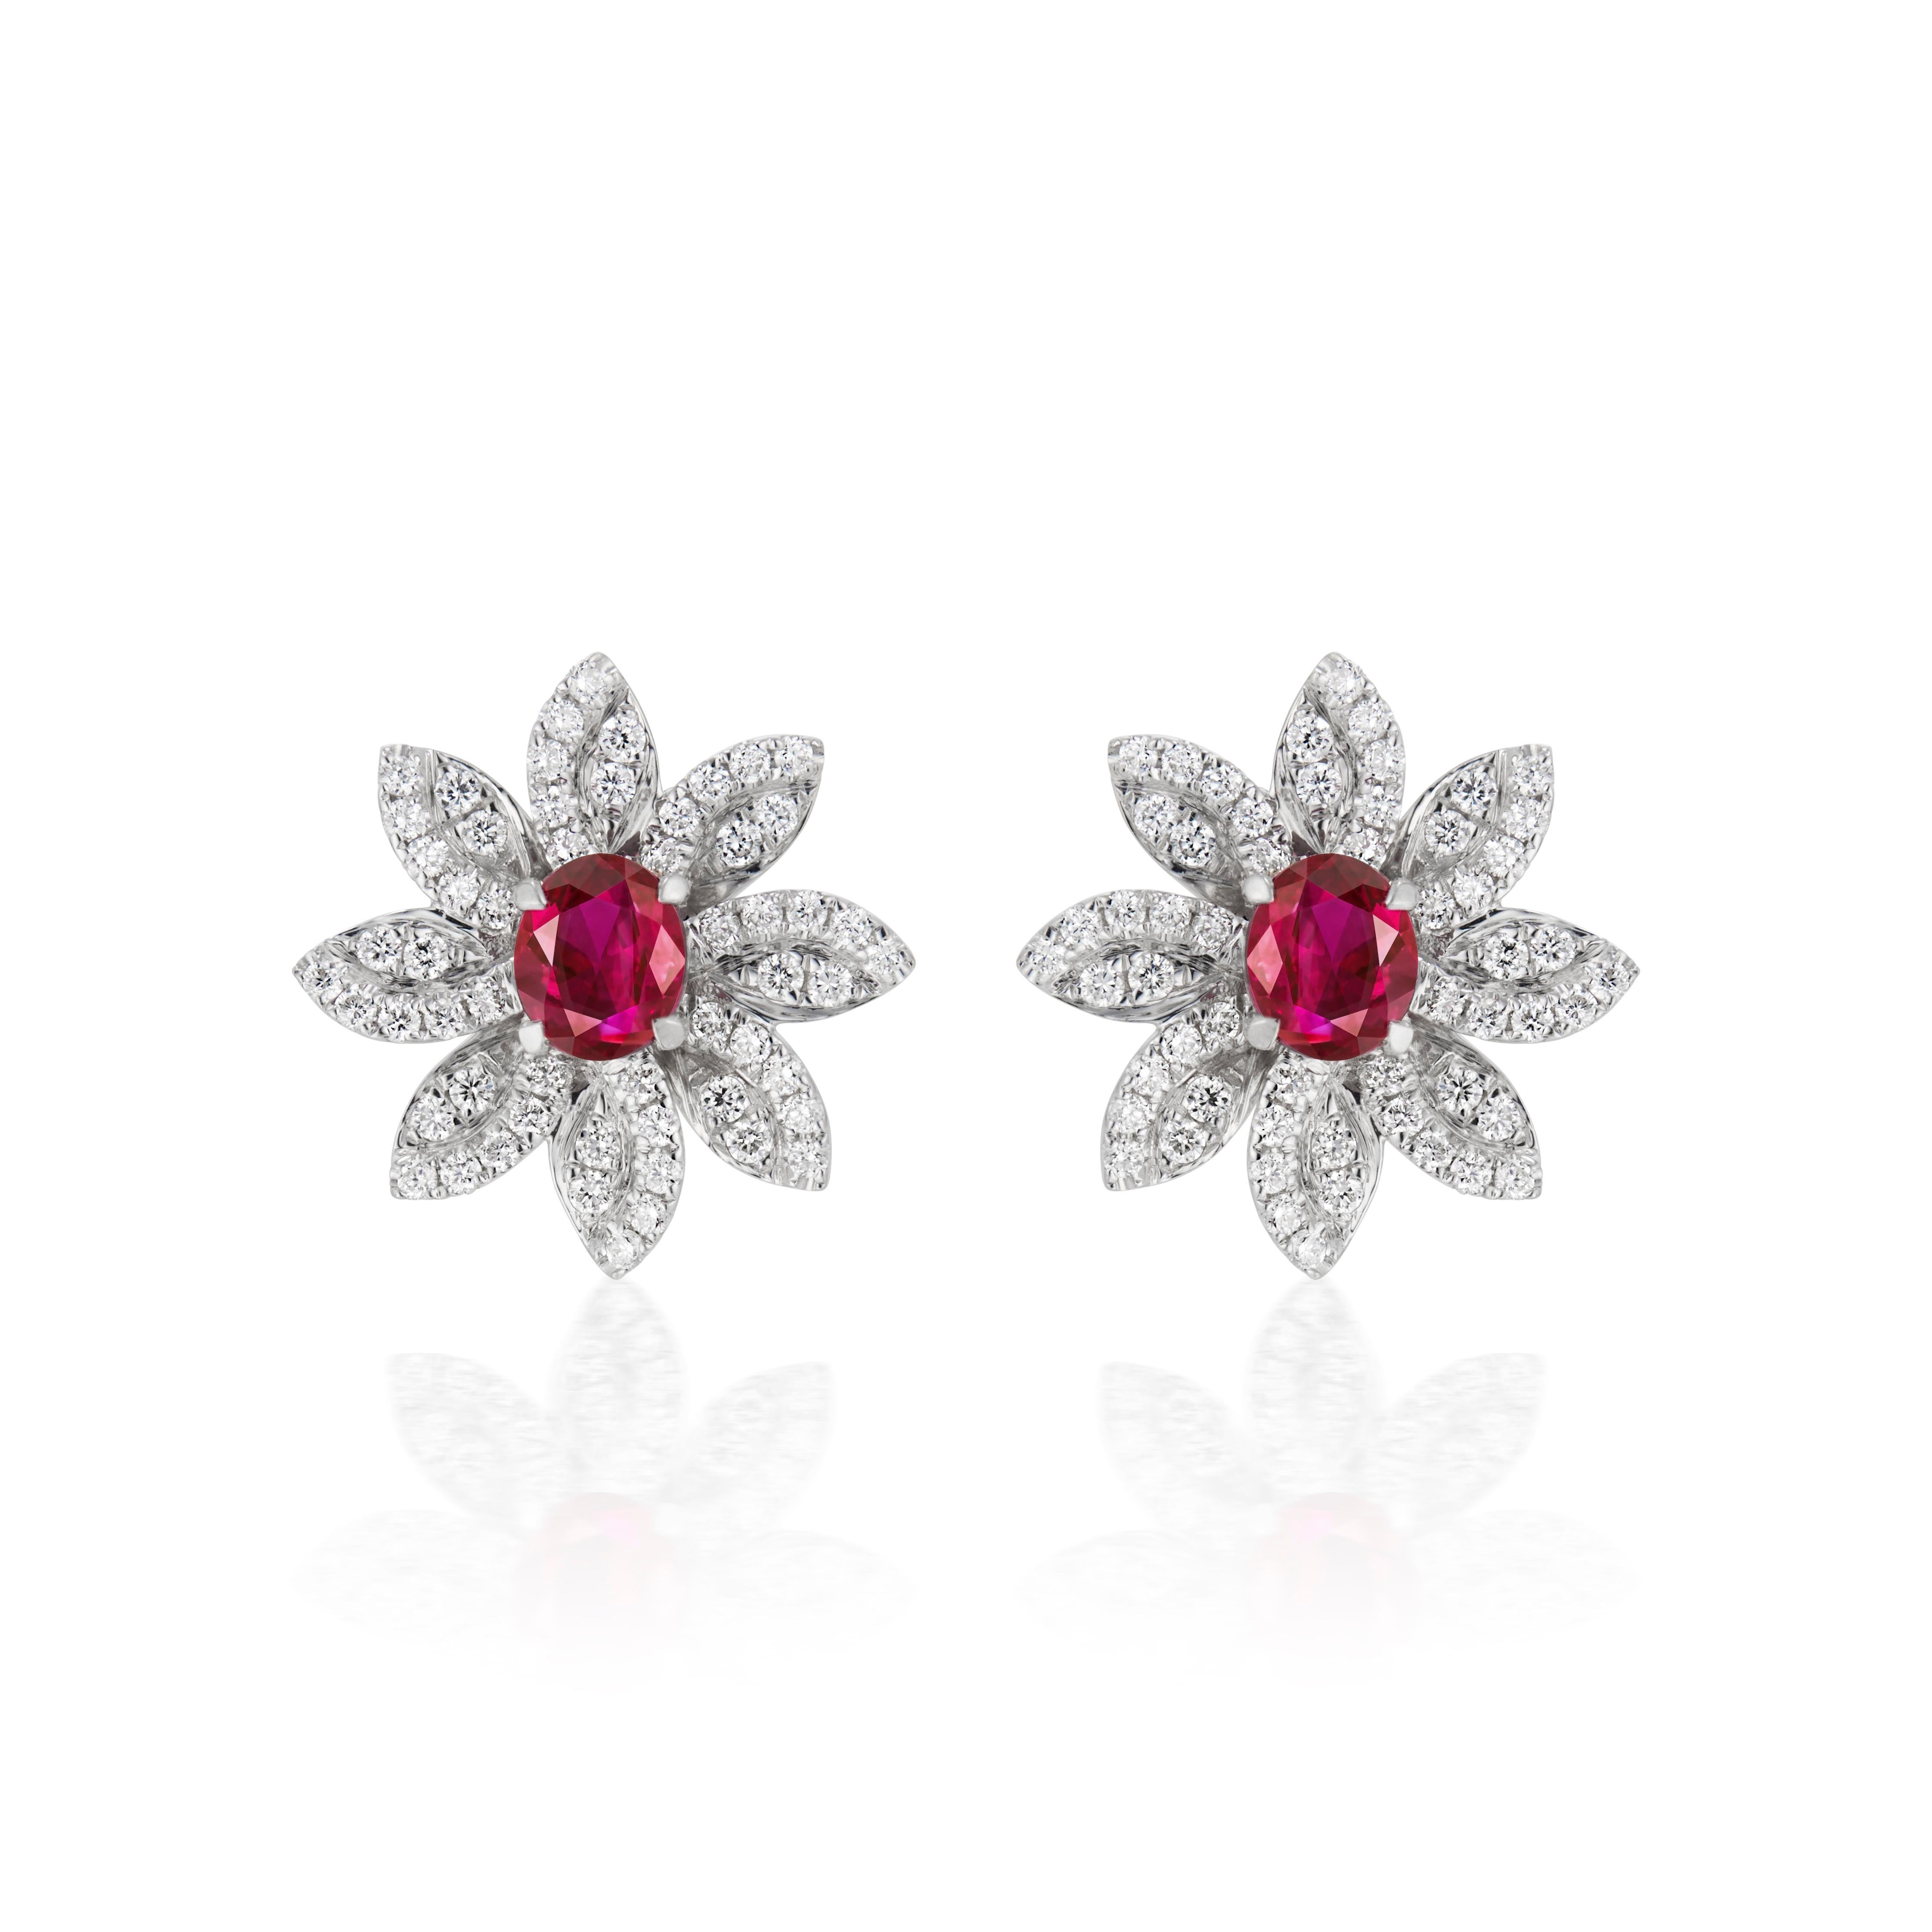 18K WHITE GOLD 
112 DIAMONDS, 0.74 CARATS
2 NO-HEAT BURMESE RUBIES, 1.52 CARATS
GIA Certified

Introducing our exquisite Flower Studs, a true marvel of our craftsmanship. These stunning studs feature two magnificent Burmese No Heat Rubies, weighing